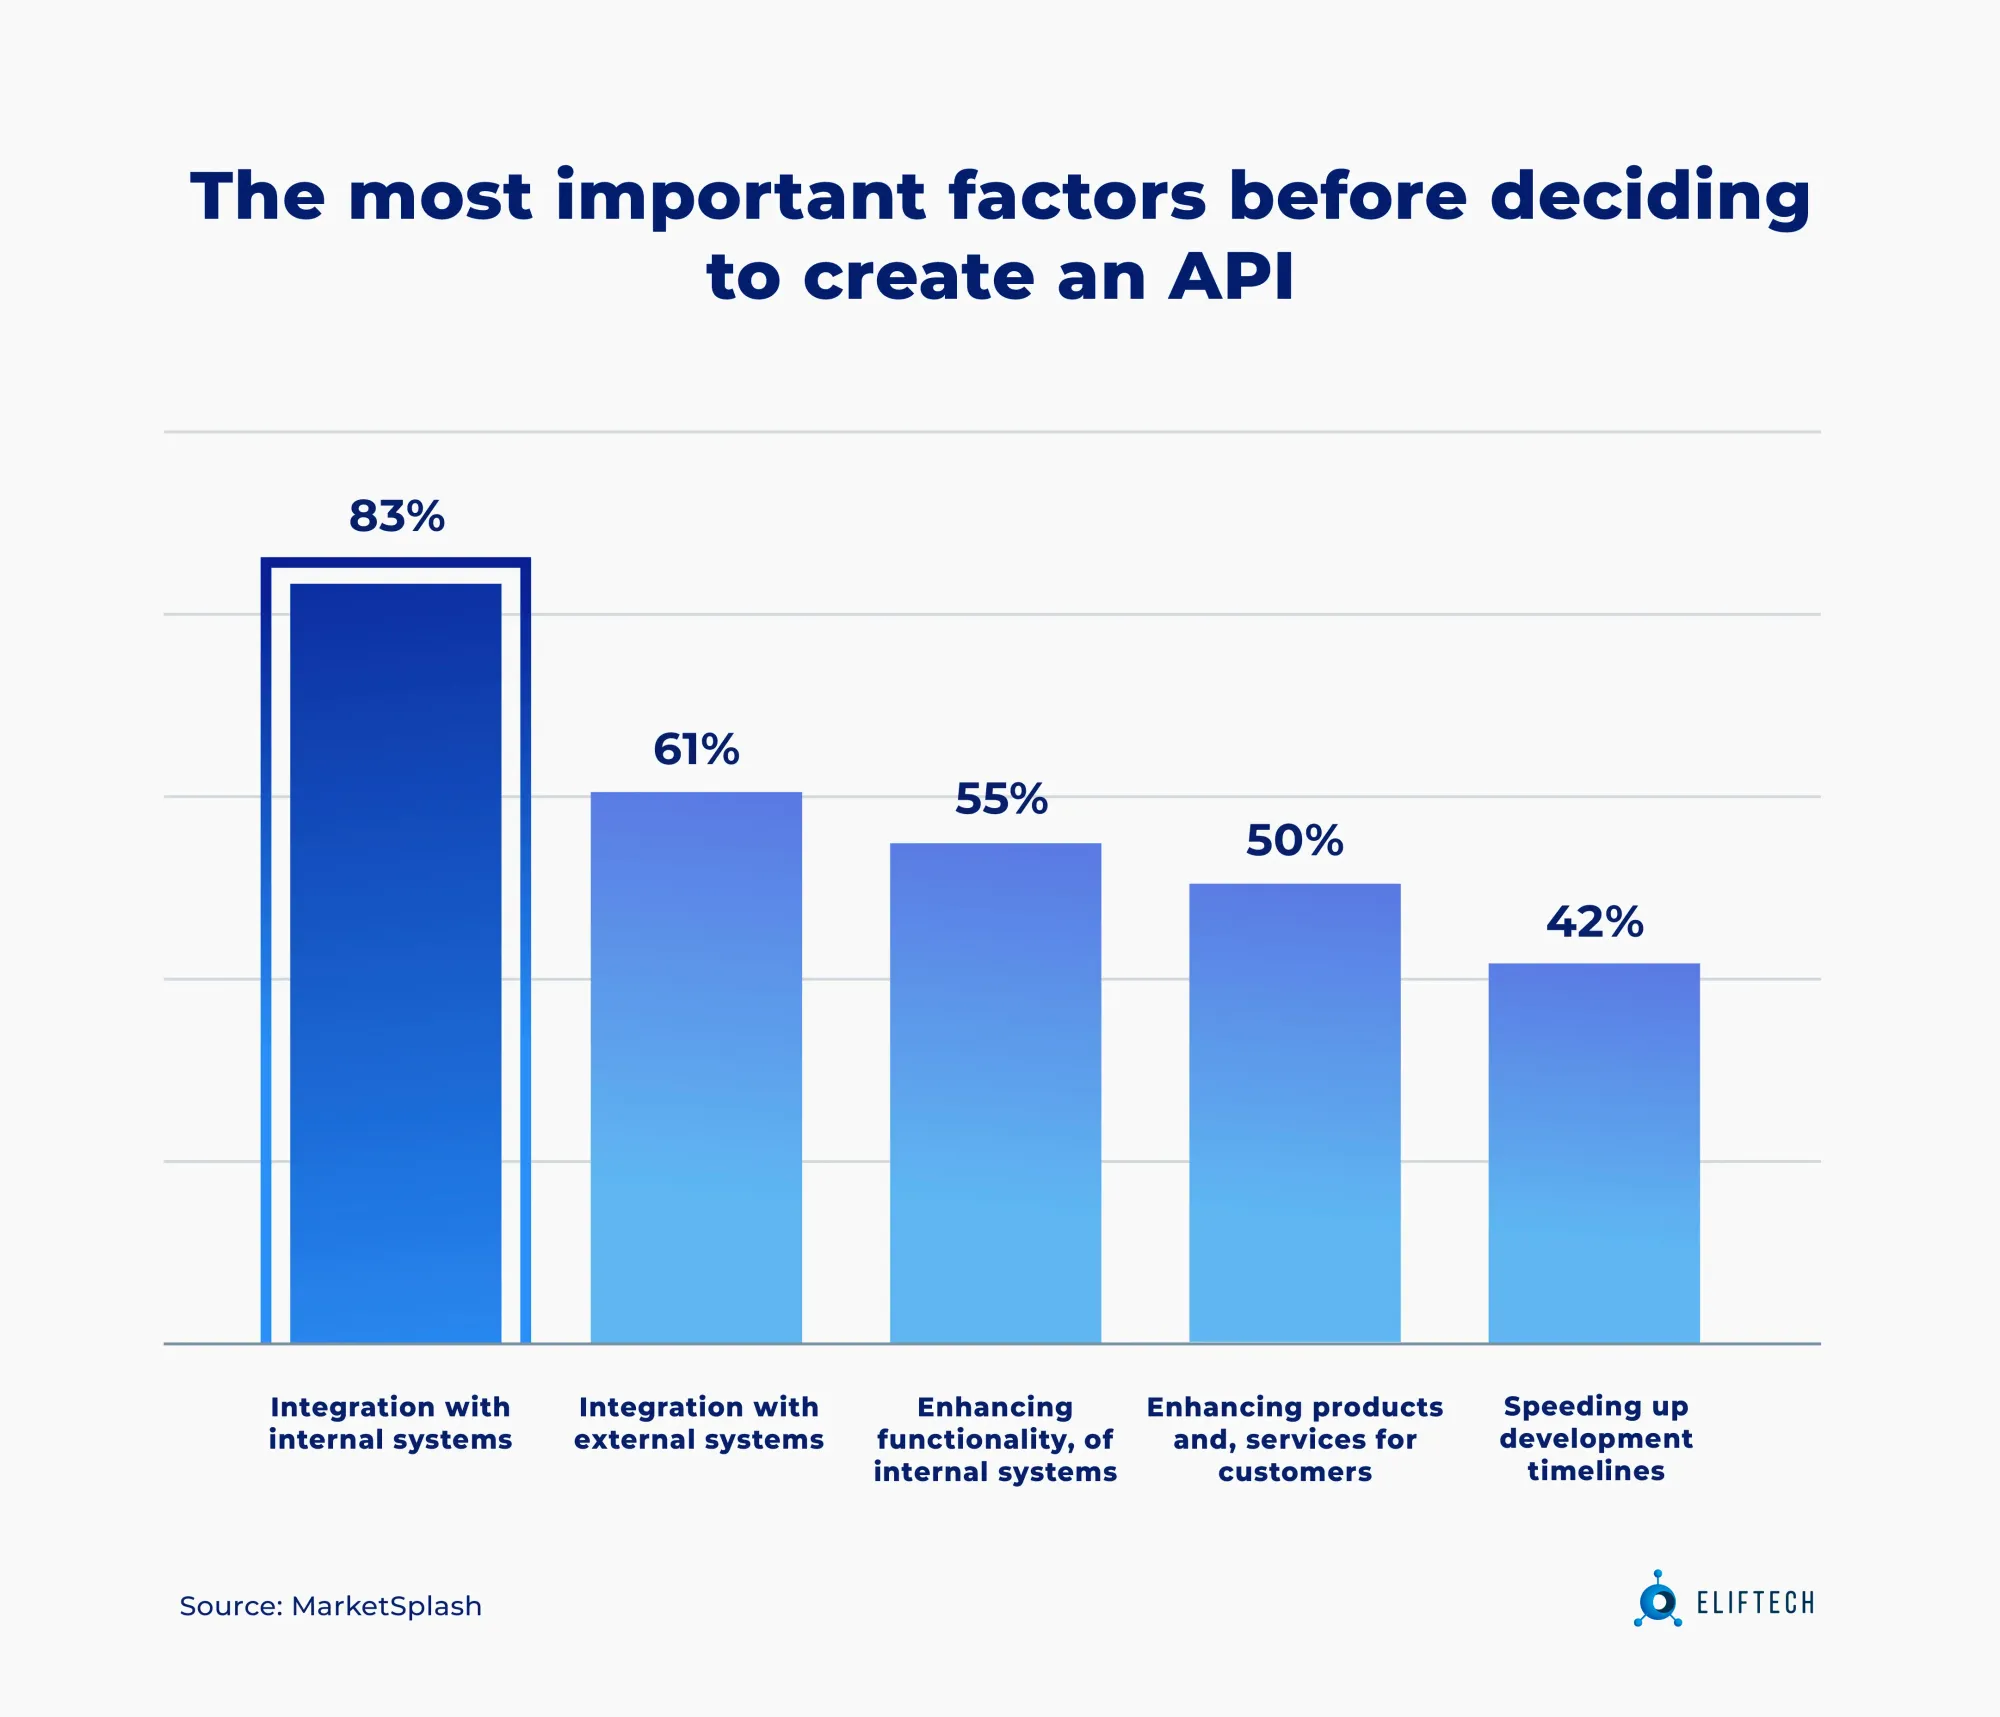 Integration with internal systems is the #1  factor when integrating APIs.